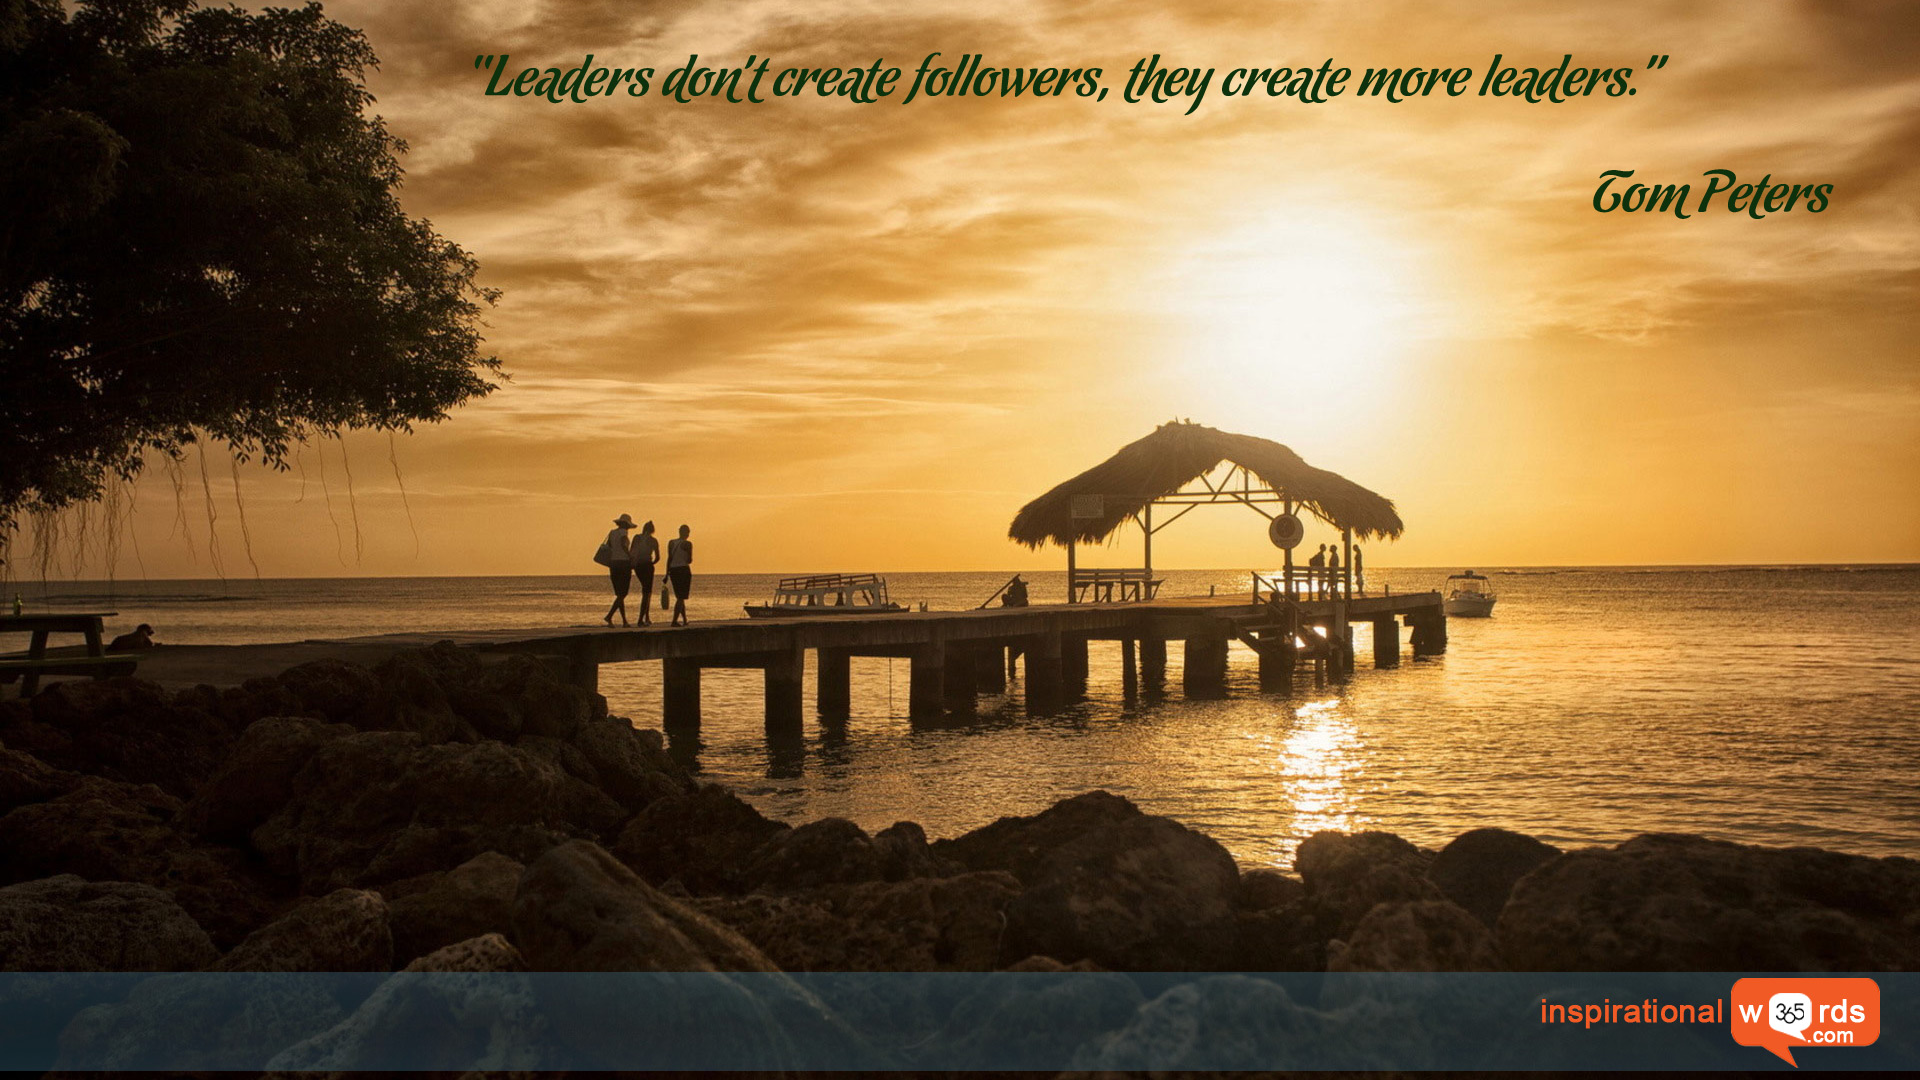 Inspirational Wallpaper Quote by Tom Peters